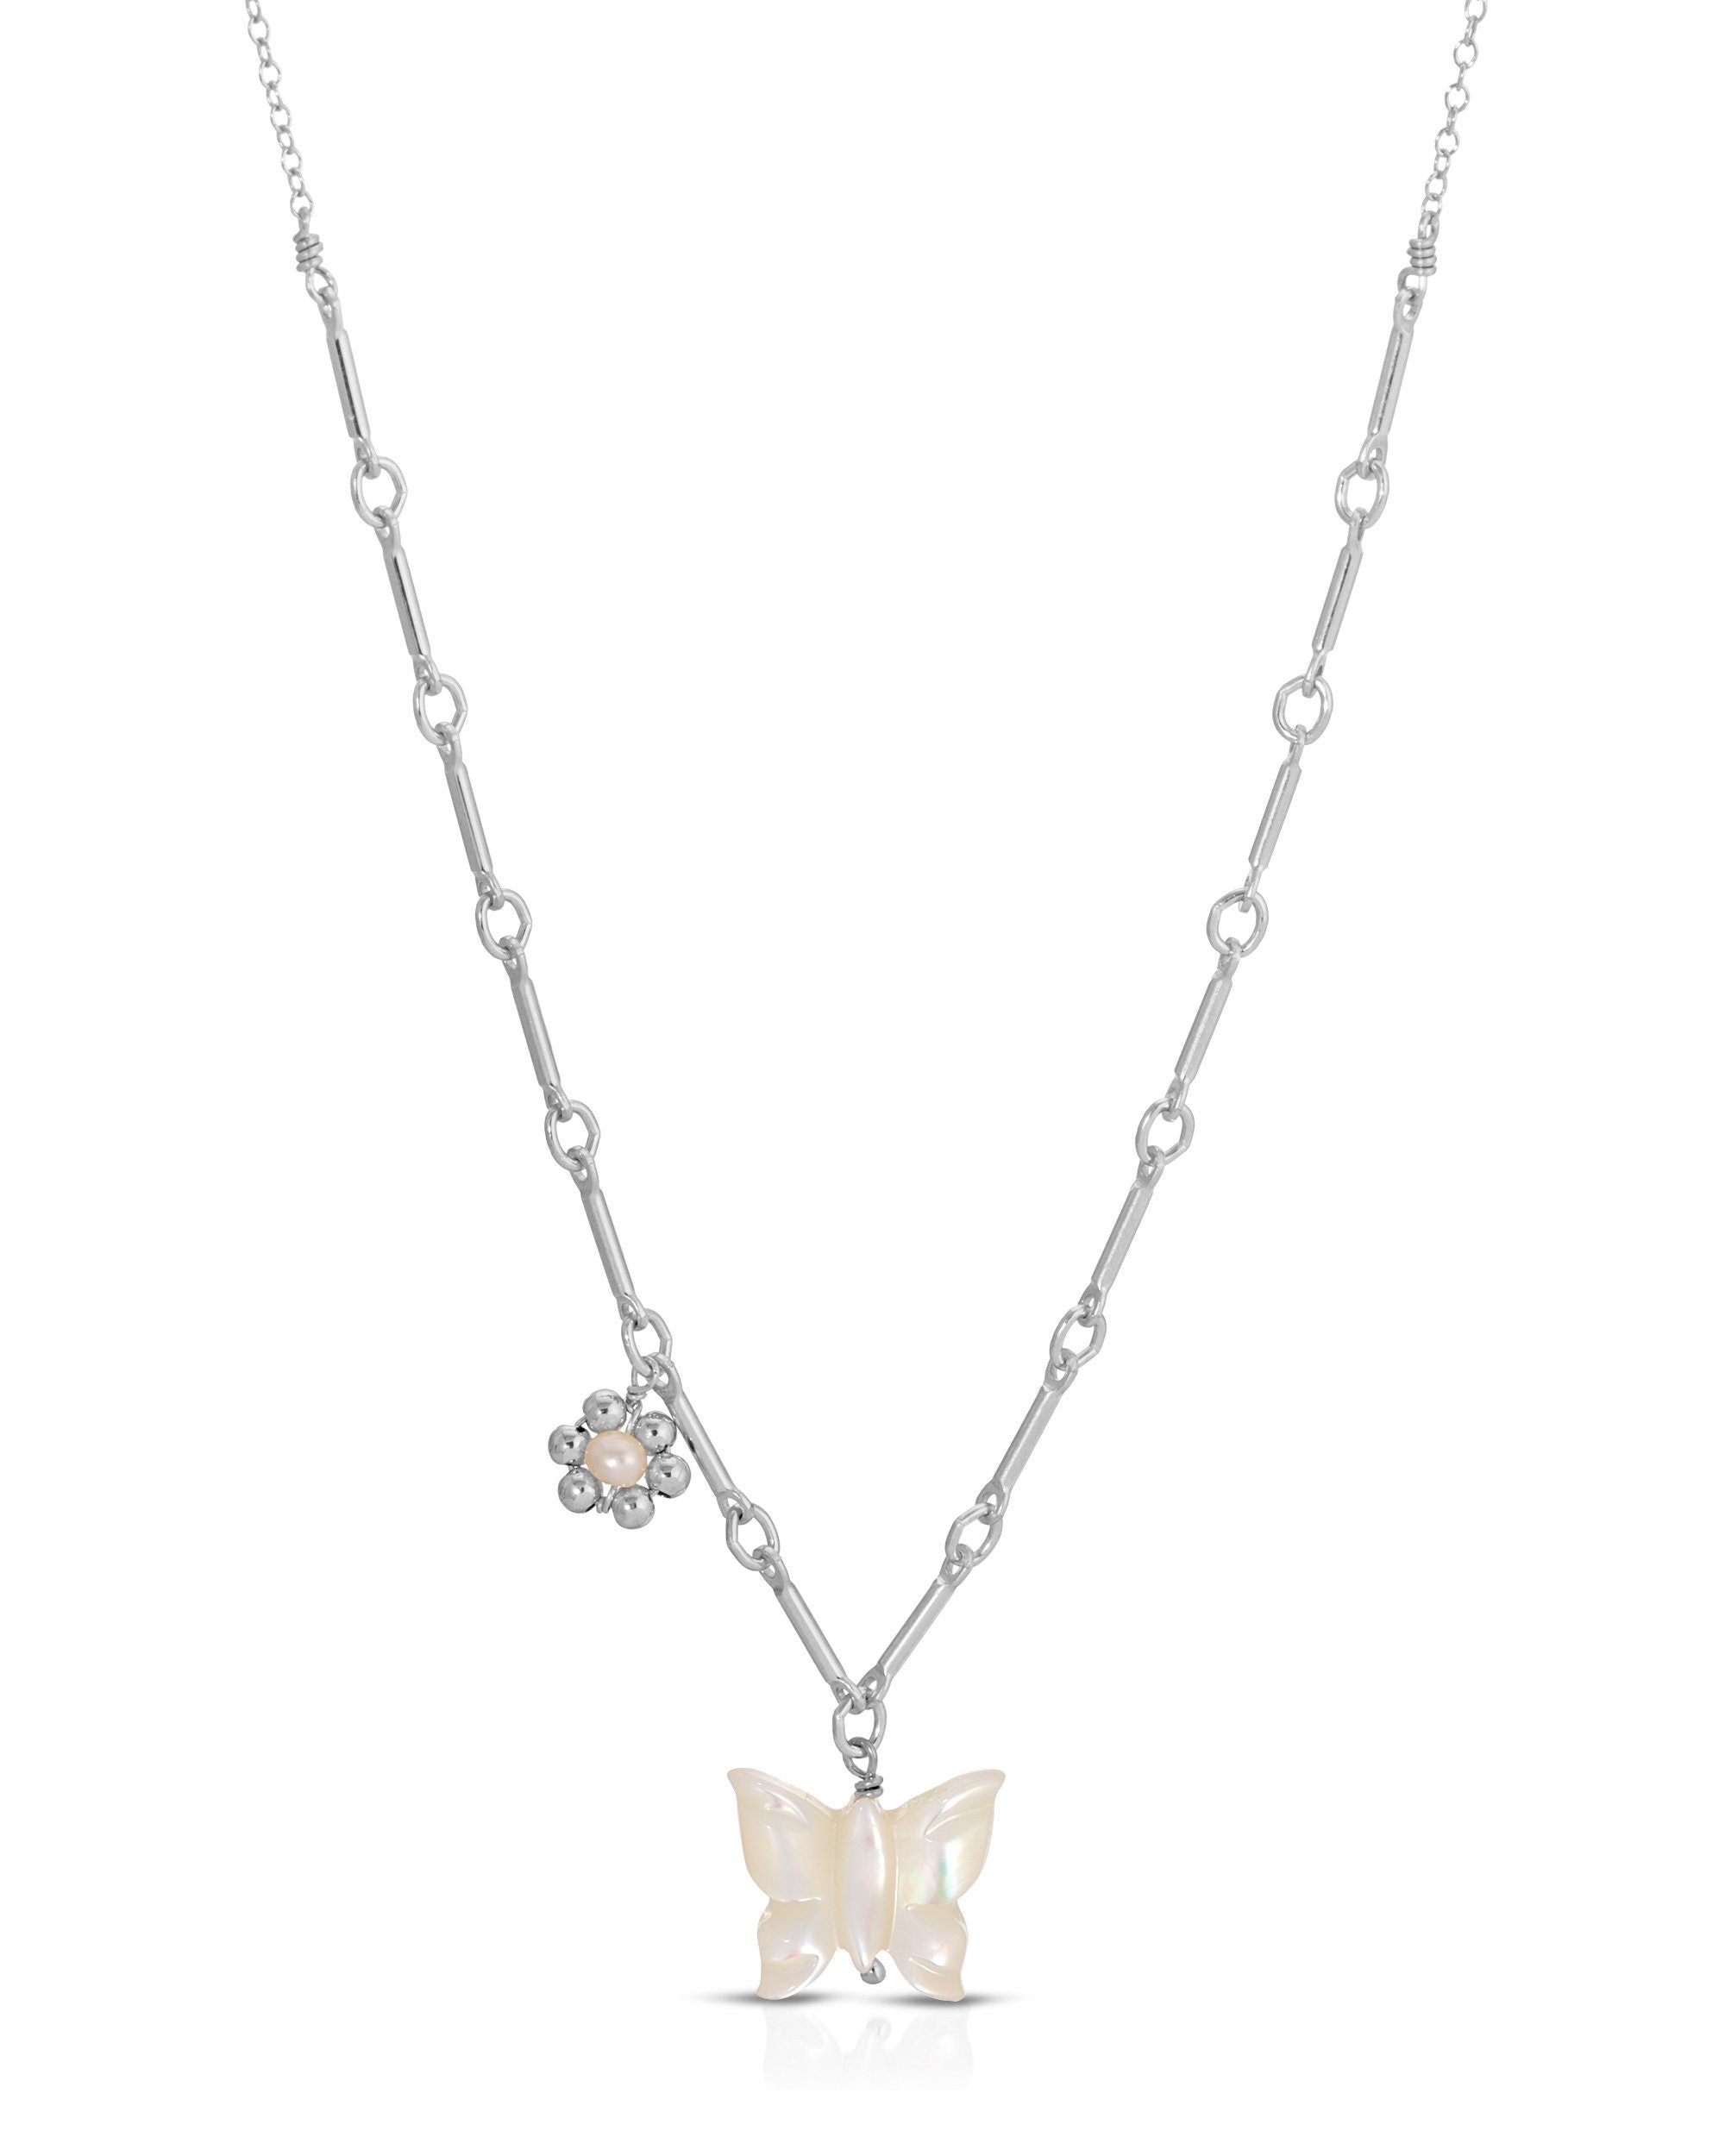 Tinley Necklace by KOZAKH. A 16 to 18 inch adjustable length necklace, with flat cable chain on top half and bar link chain on bottom half, crafted in Sterling Silver, featuring a hand-carved Mother of Pearl butterfly charm and a handmade silver beaded daisy with 2mm pearl in the center.